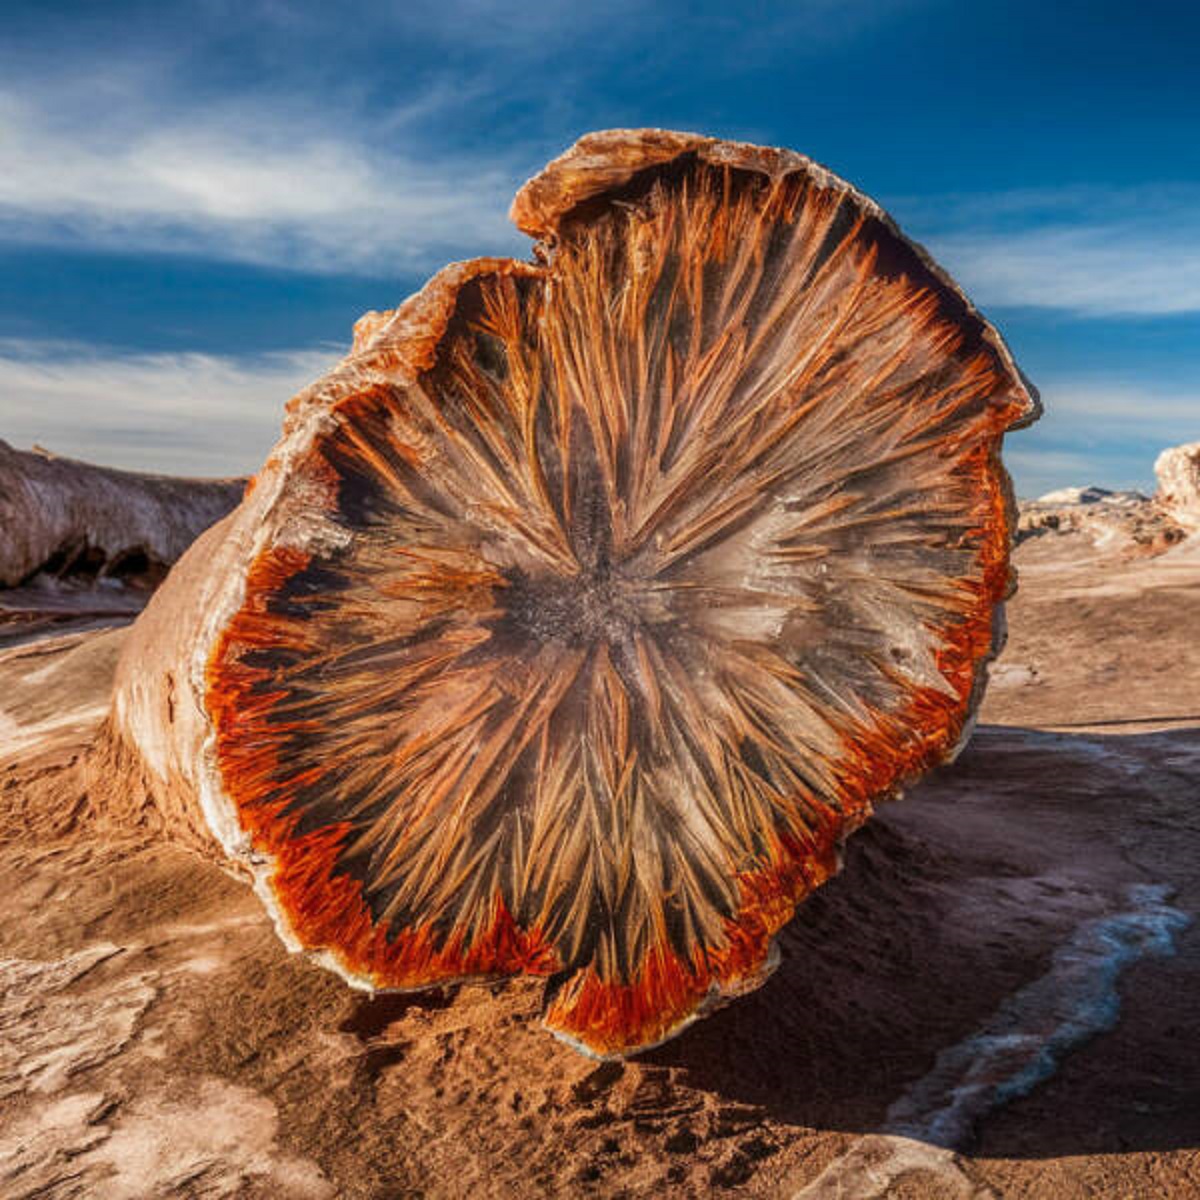 "A Captivating Close-Up View Of A Magnificent 220 Million-Year-Old Petrified Log, Located In The Iconic Petrified Forest National Park In Ari Zona, USA"